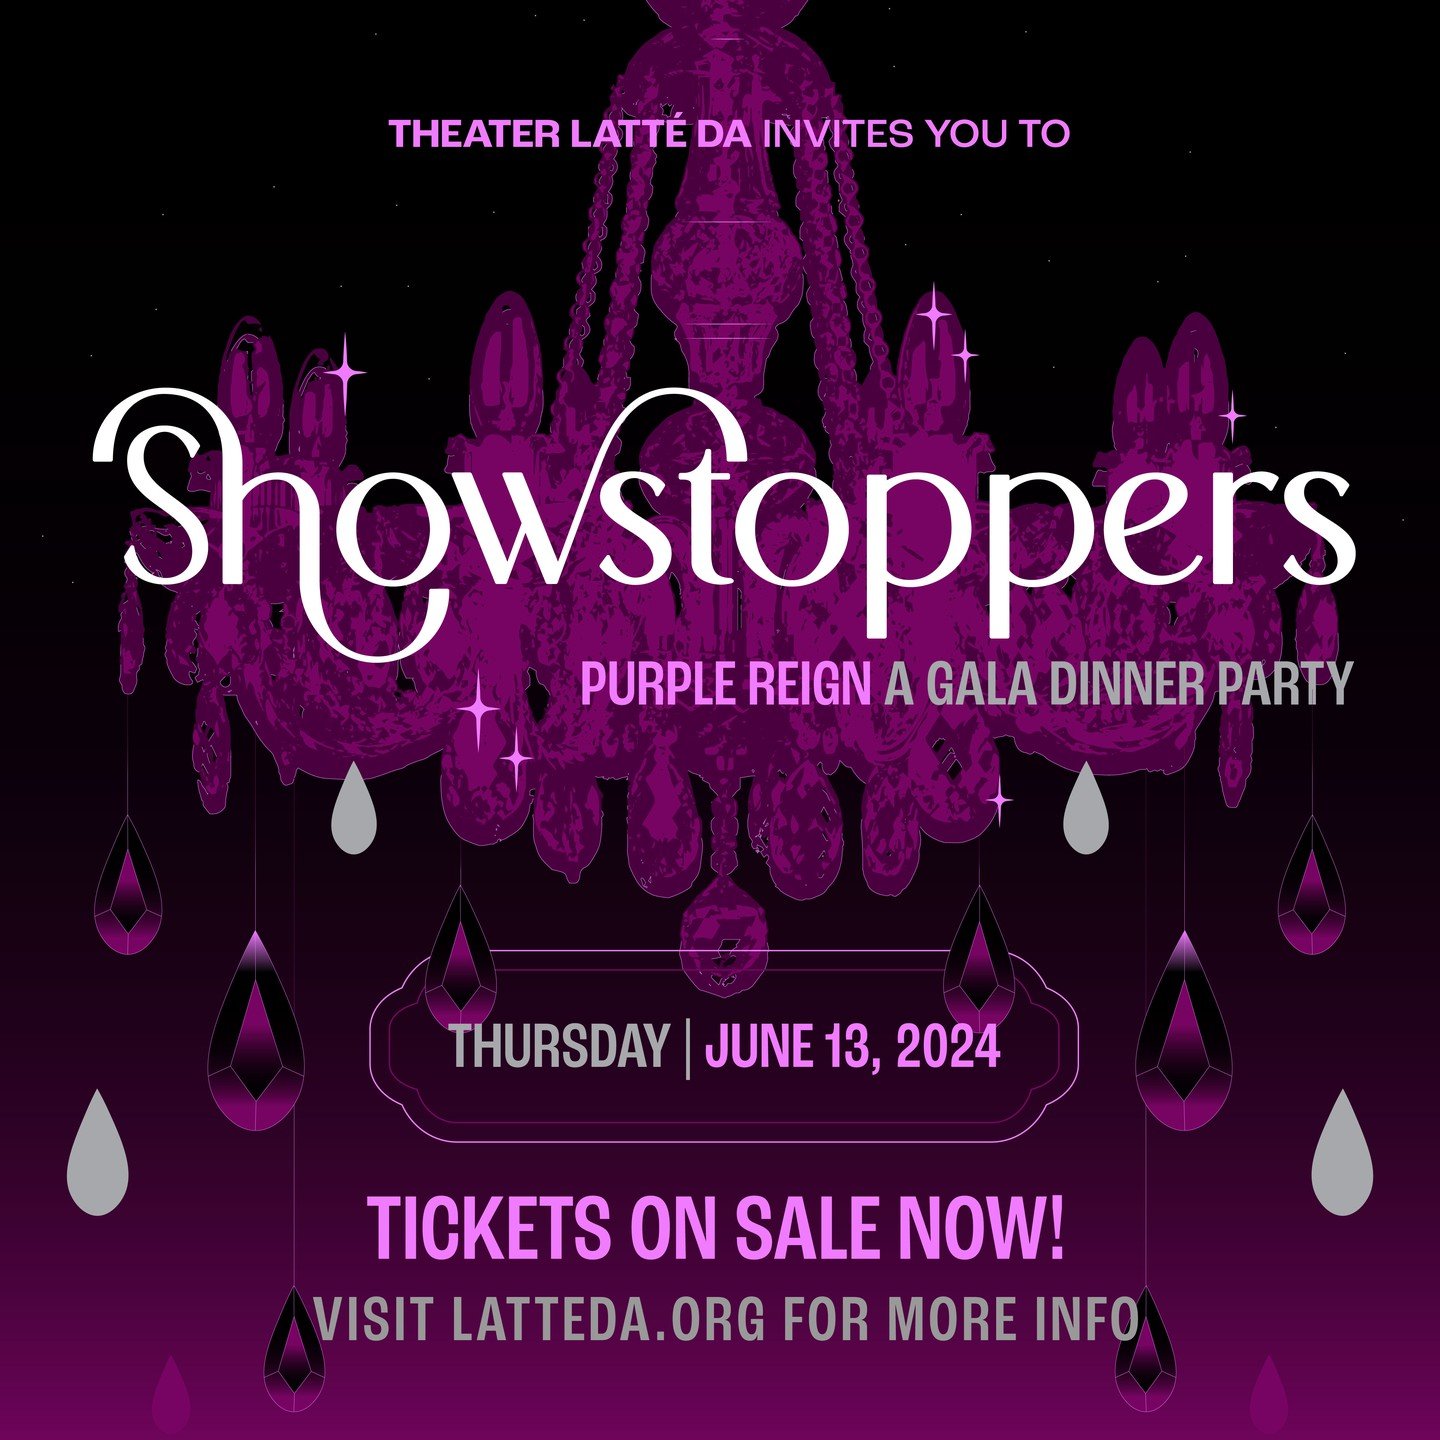 Have you gotten your gala tickets yet? 

Dress in your glamorous best and join us for an unforgettable evening of fun, delectable food and drink, and show-stopping performances from the Twin Cities &rsquo;best theater artists as we celebrate 26 years